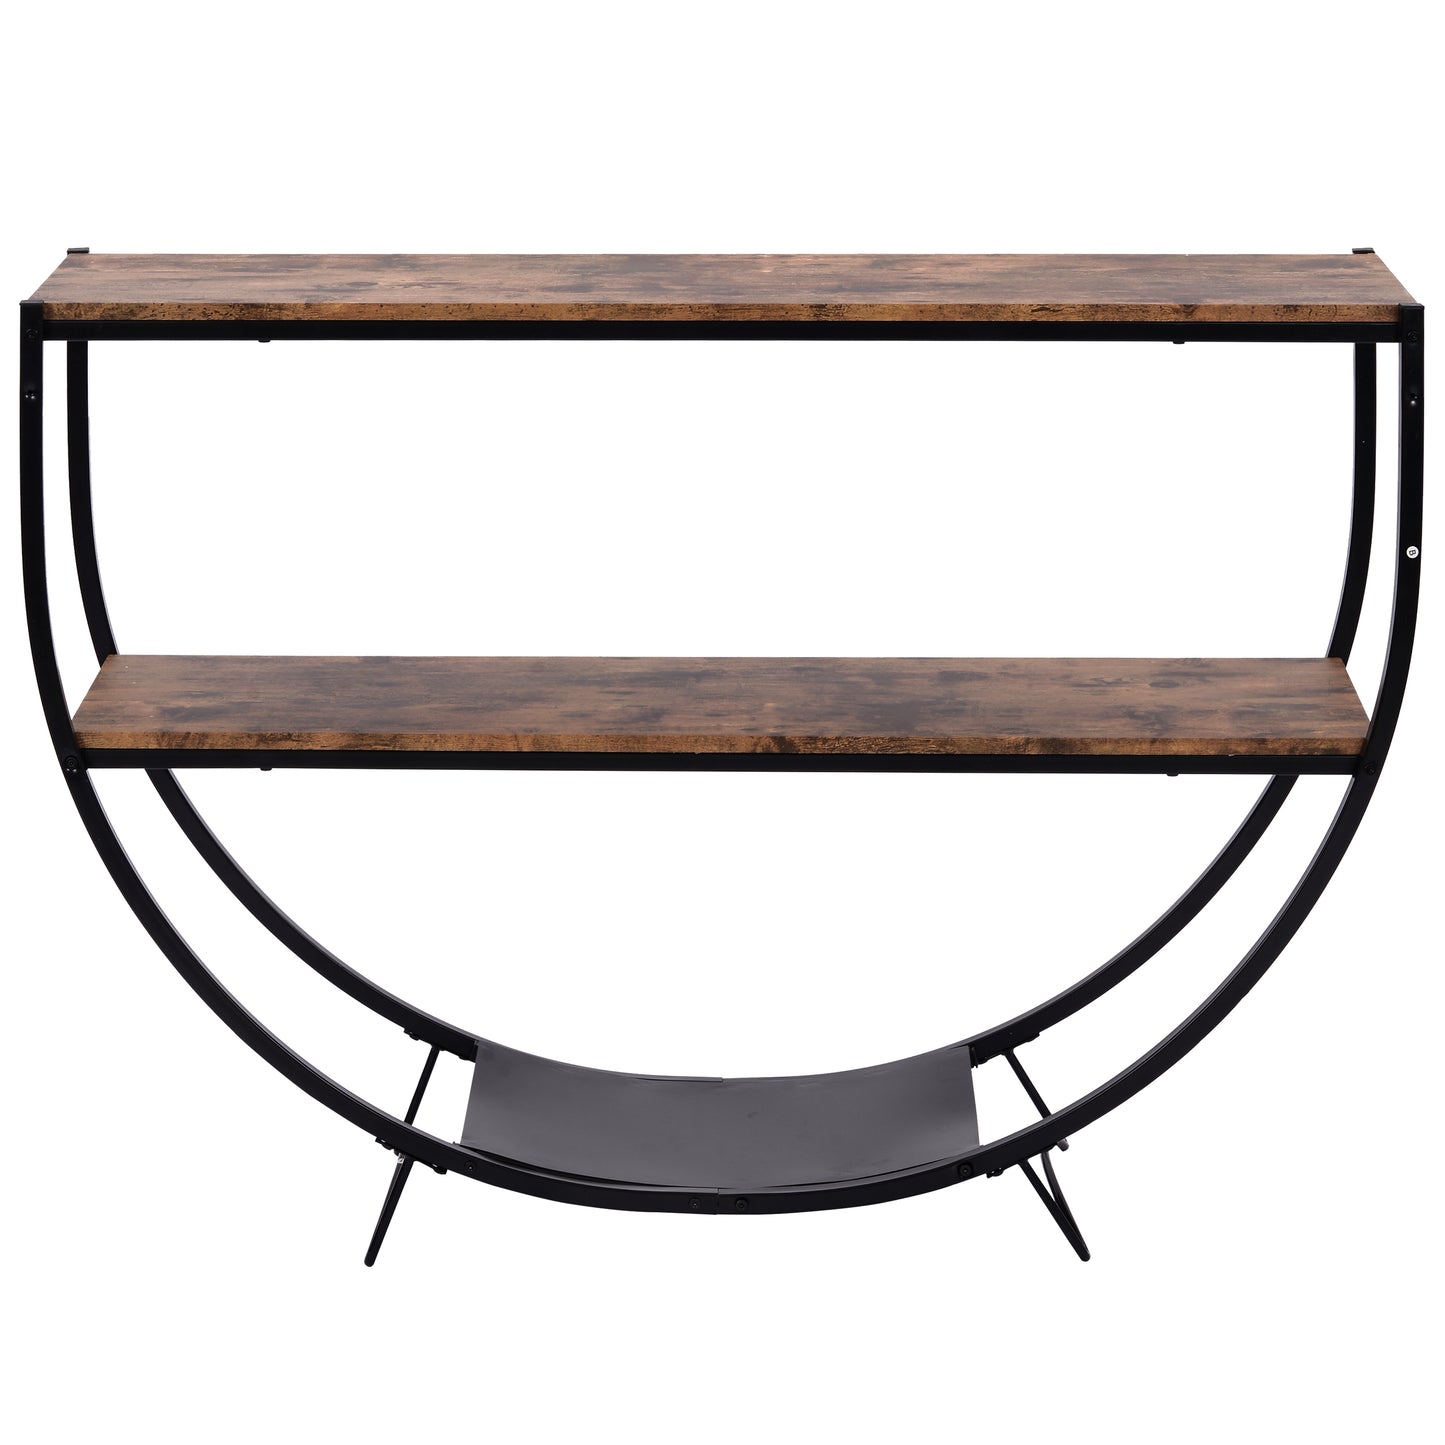 Metal Distressed Wood Console Table